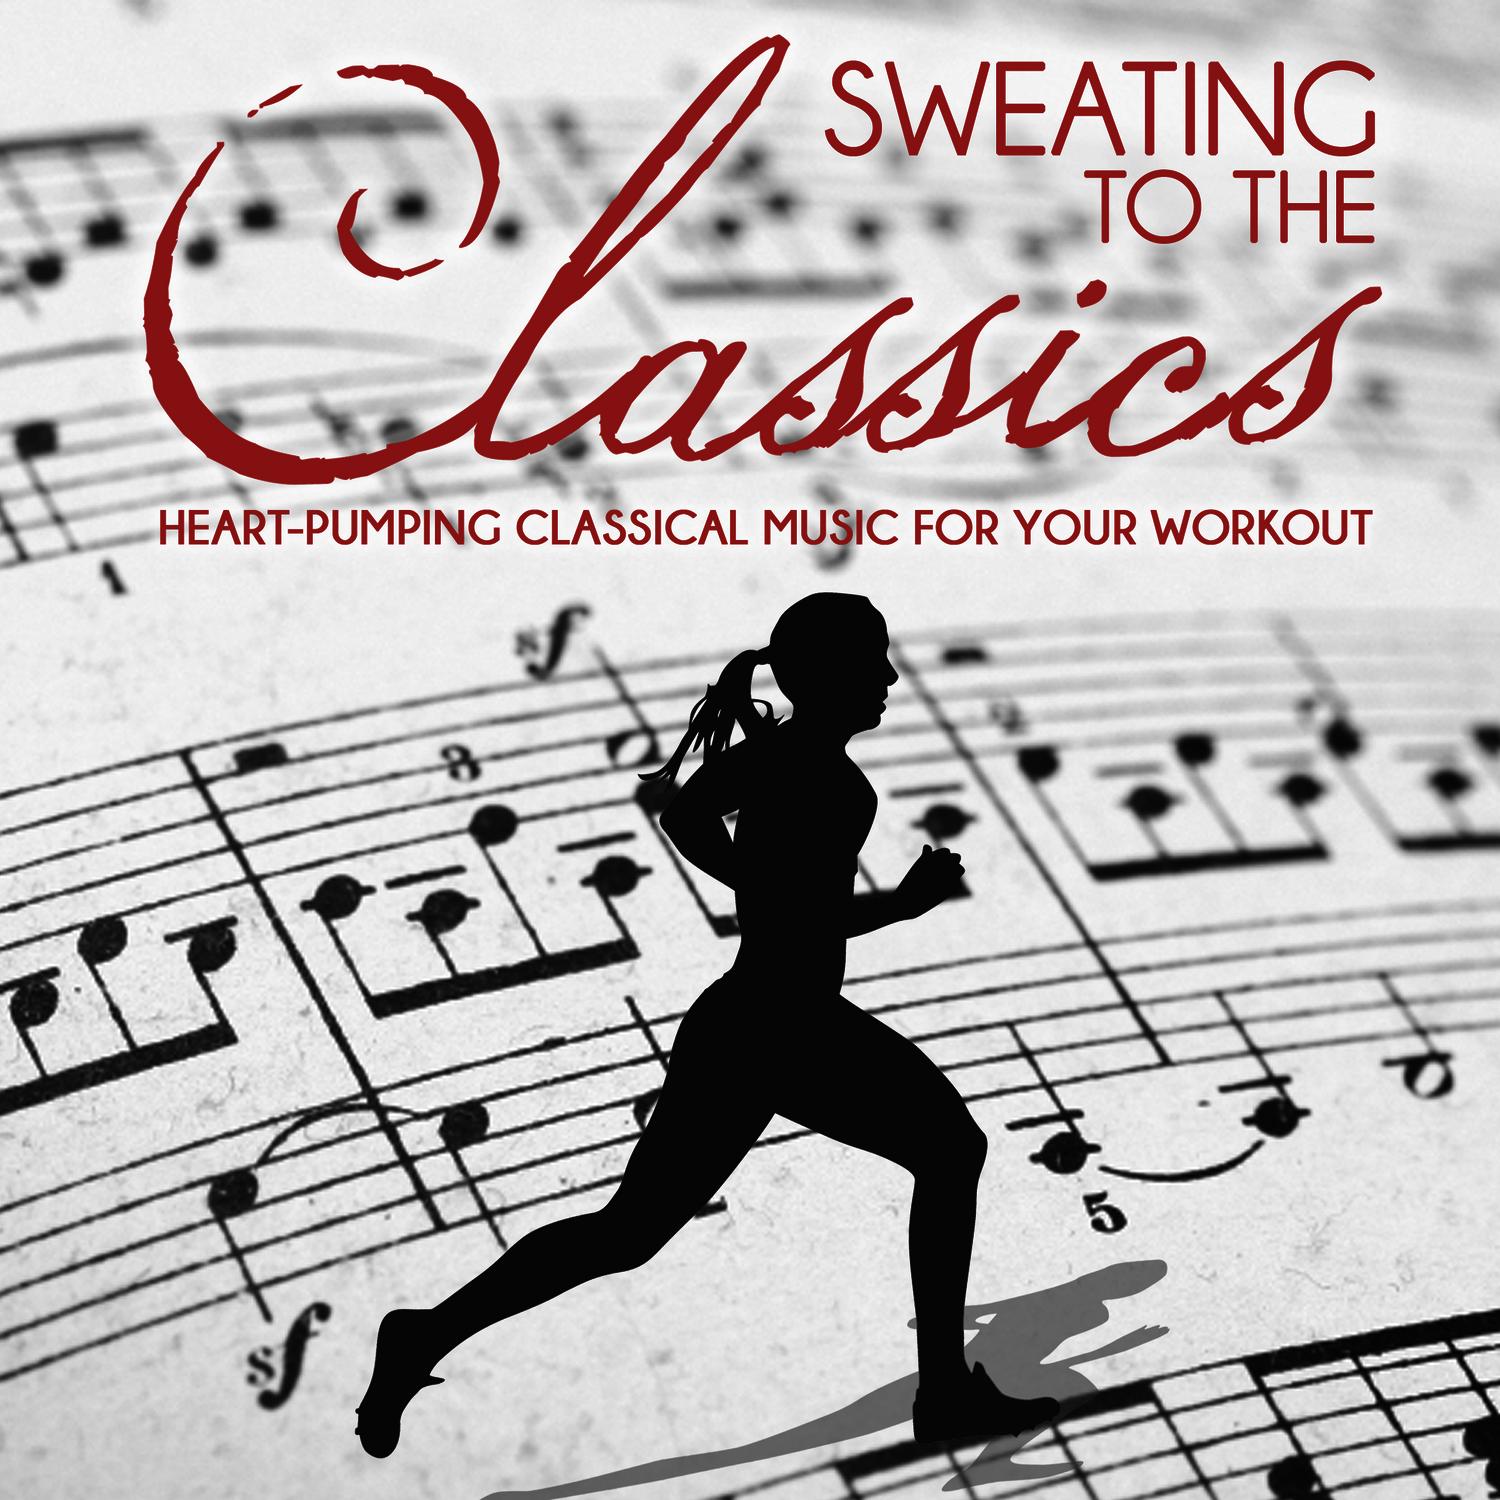 Sweating to the Classics: Heart-Pumping Classical Music for Your Workout